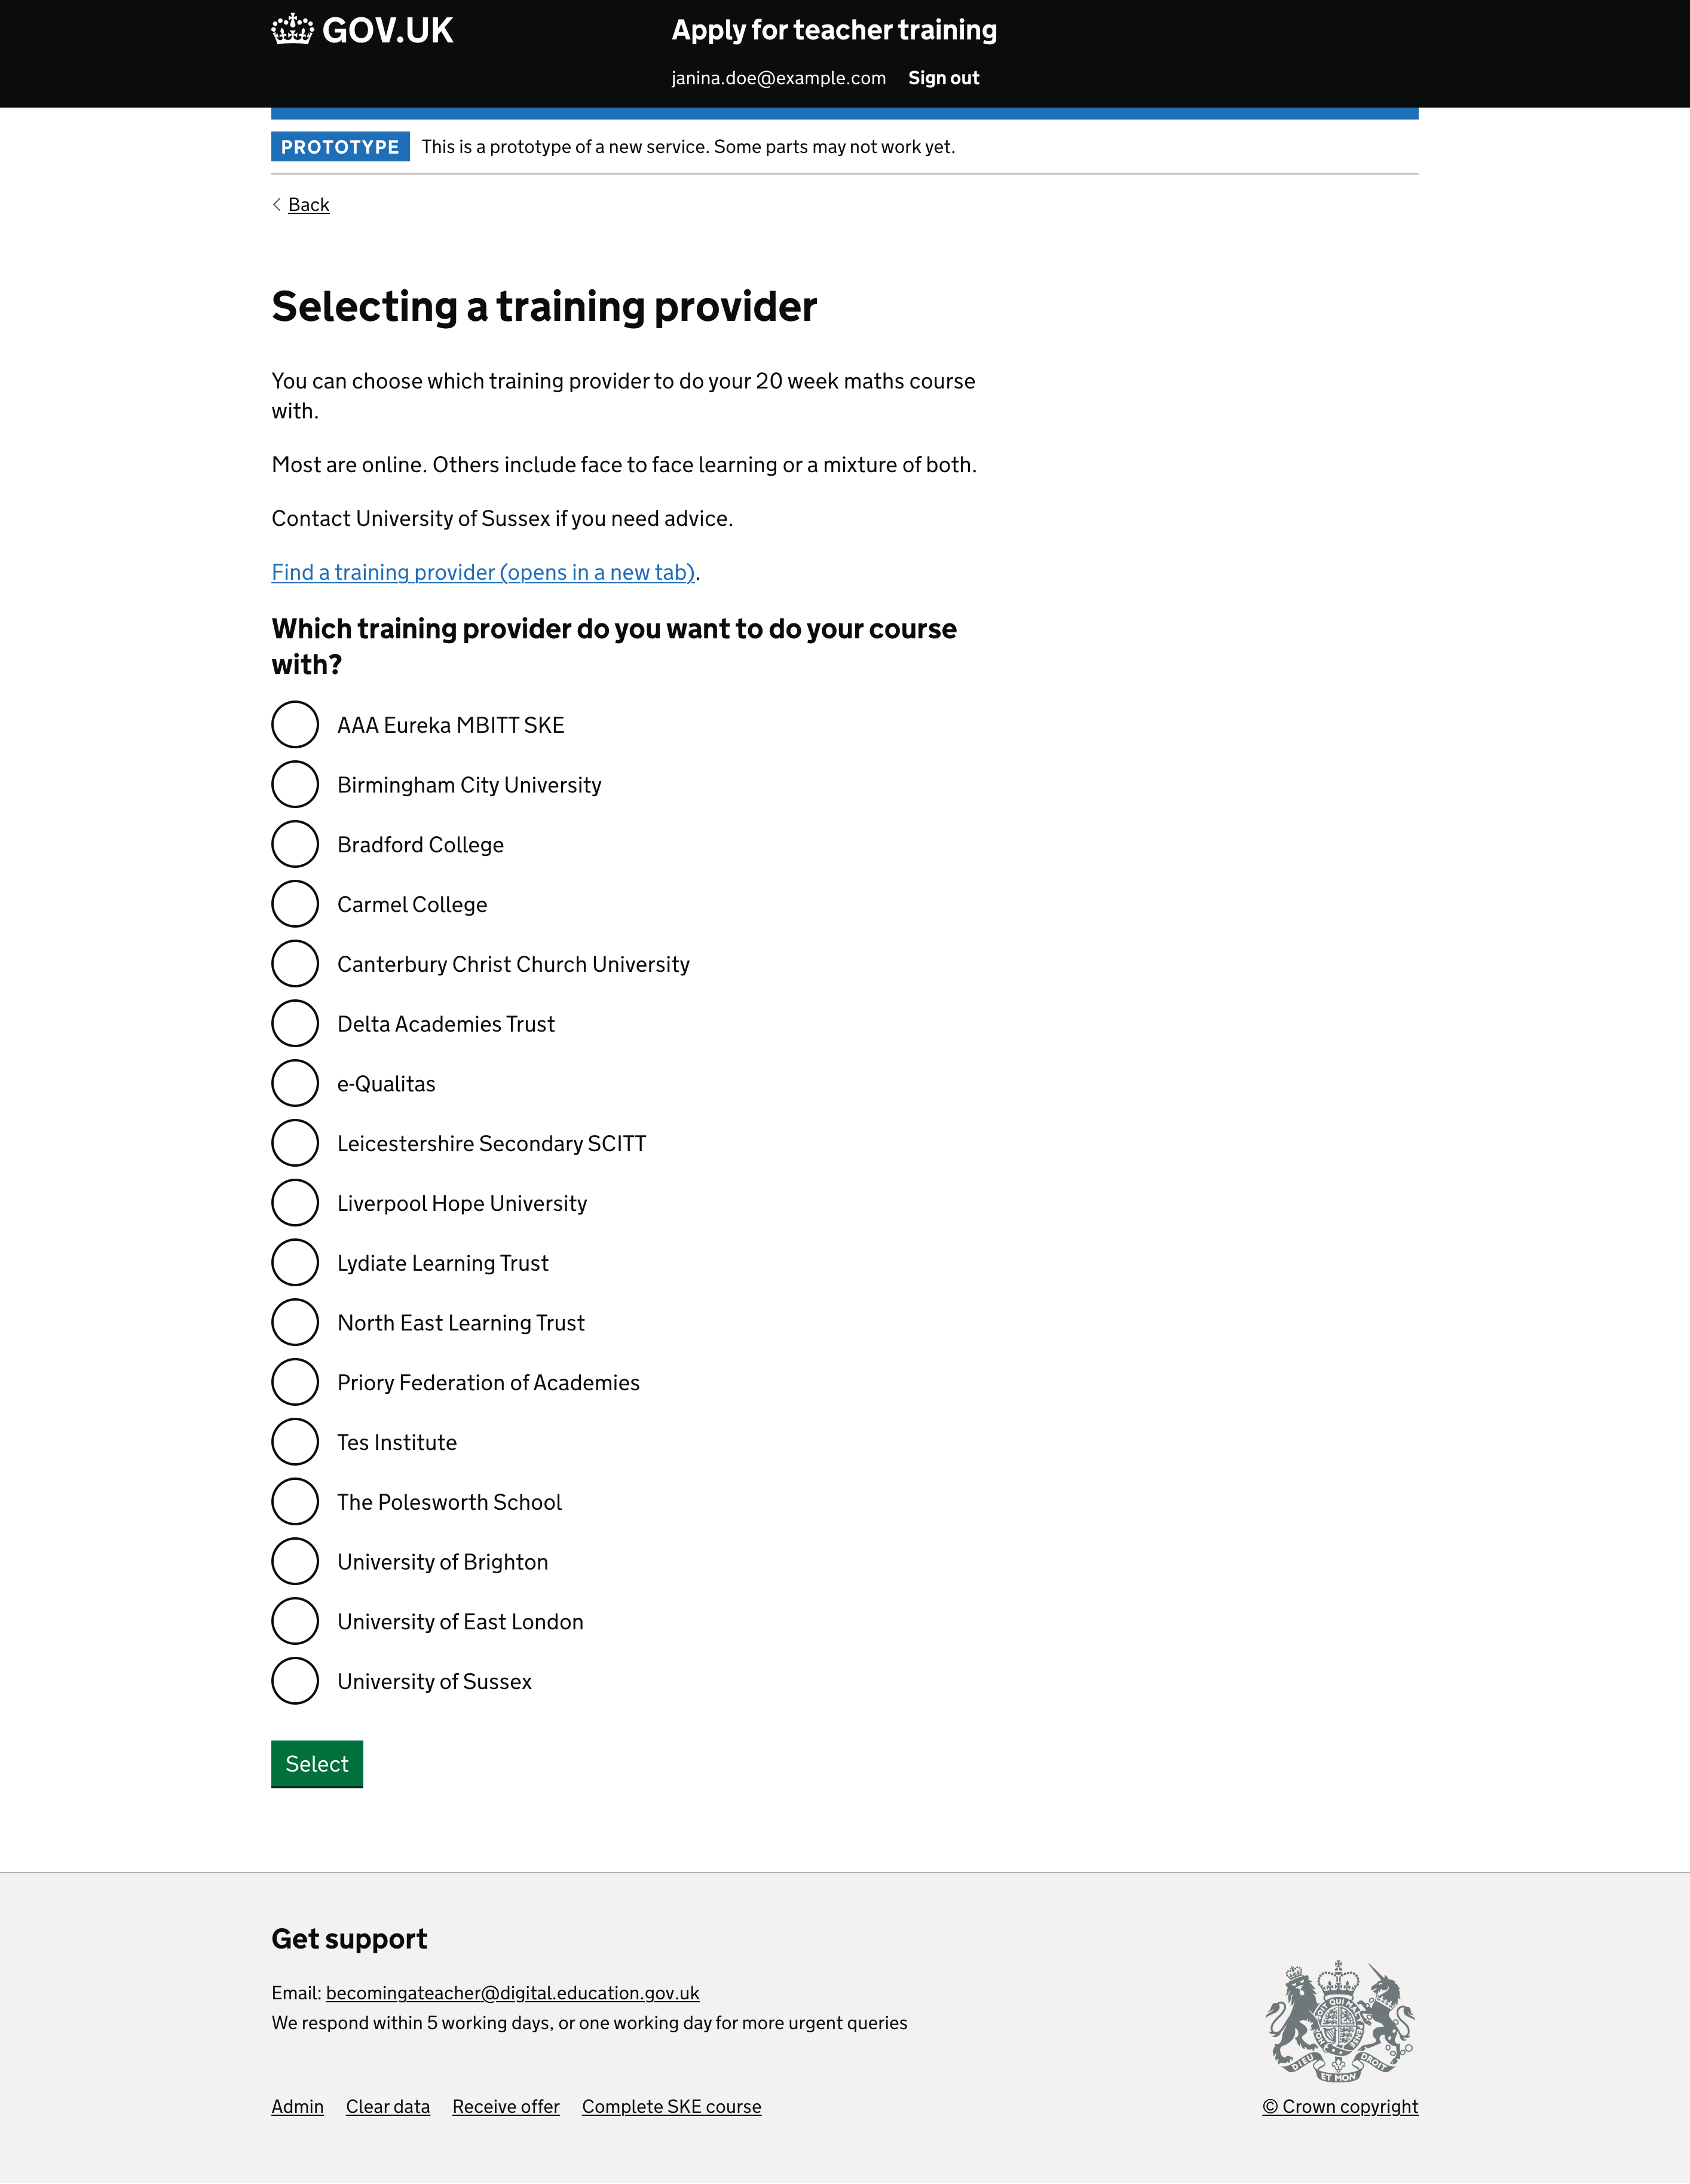 Screenshot with the heading 'Selecting a training provider'. This is followed by a link to the subject knowledge enhamncement (SKE) directory and a radio list of SKE training providers that the user can do their SKE course with.